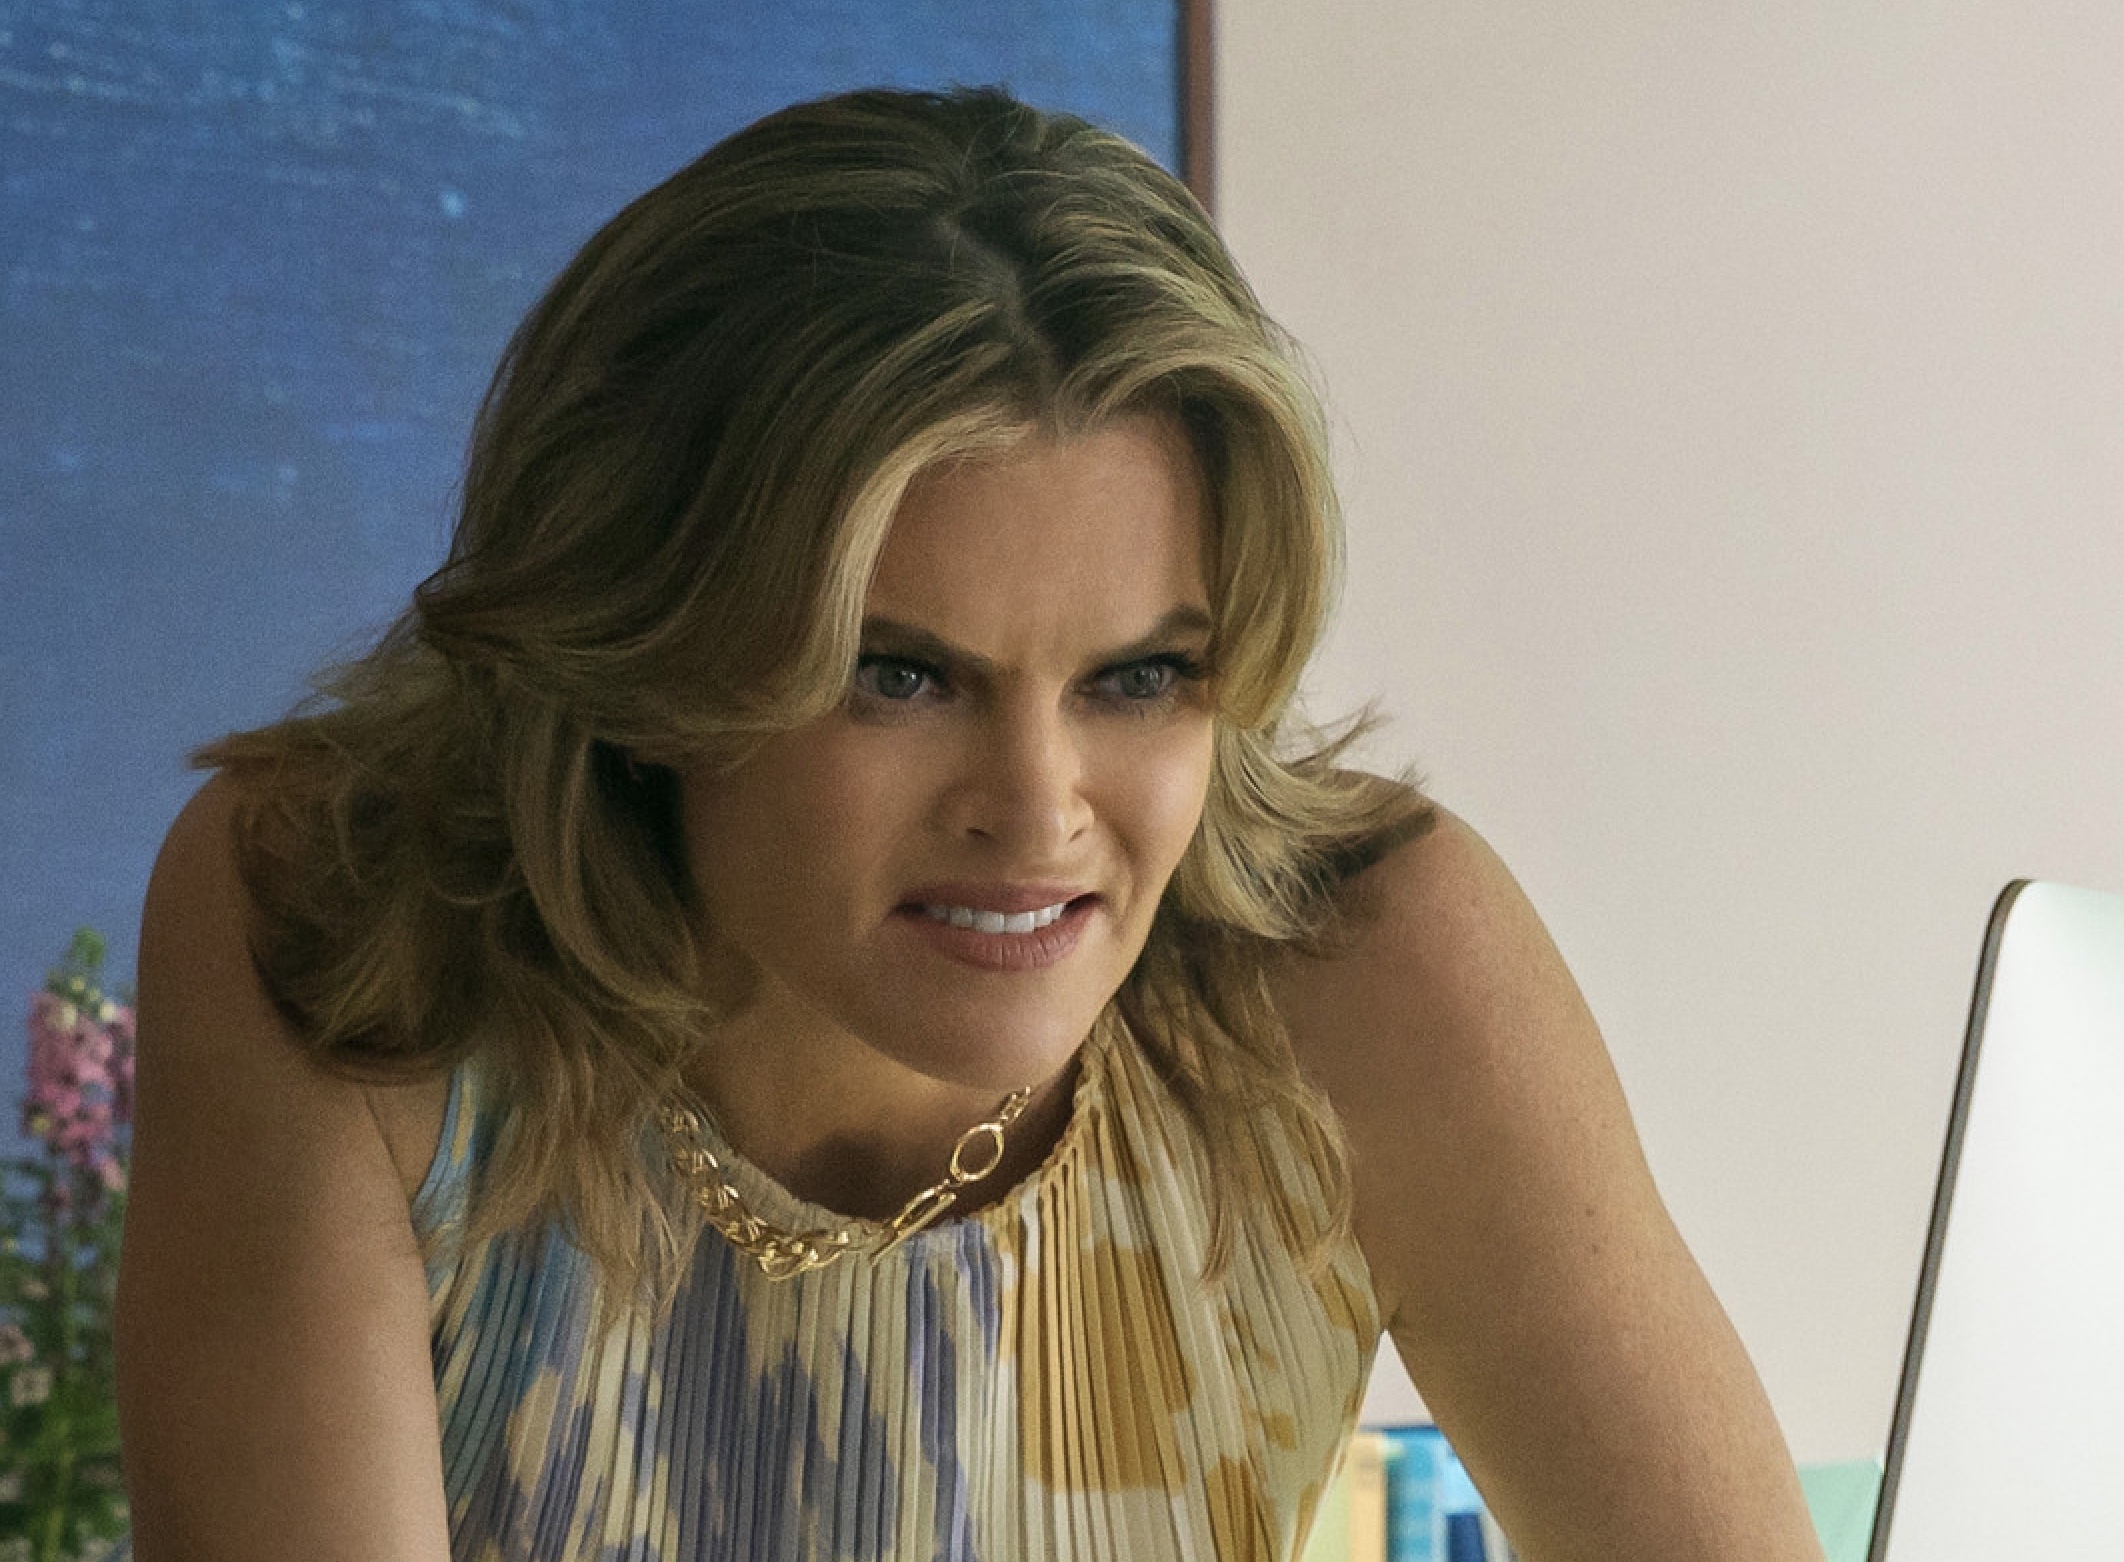 A Tourist's Guide to Love Cast on Netflix - Missi Pyle as Mona